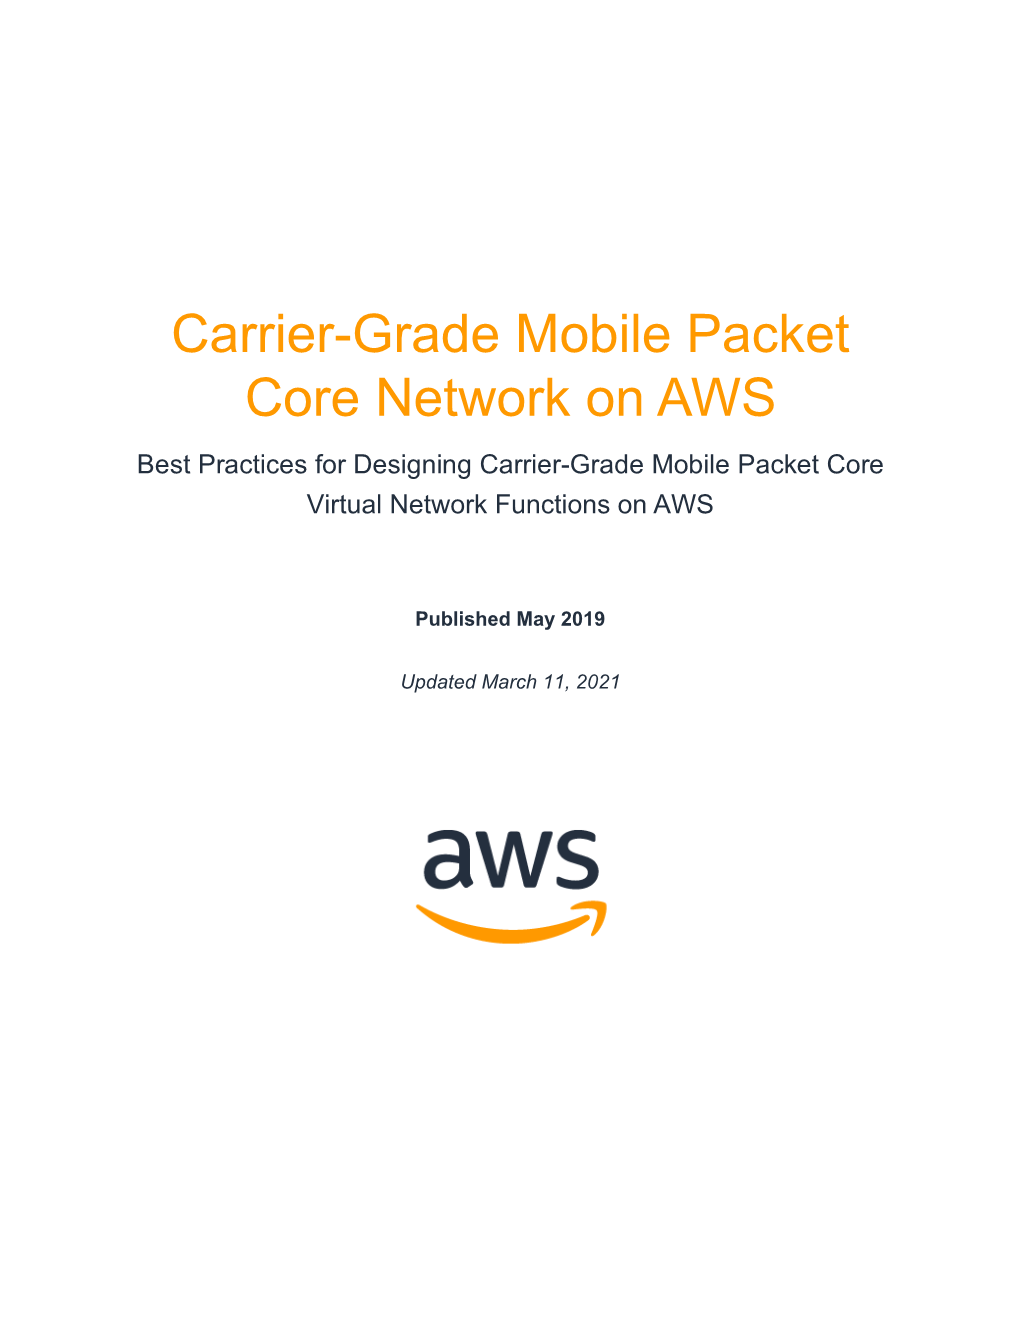 Carrier-Grade Mobile Packet Core Network on AWS Best Practices for Designing Carrier-Grade Mobile Packet Core Virtual Network Functions on AWS